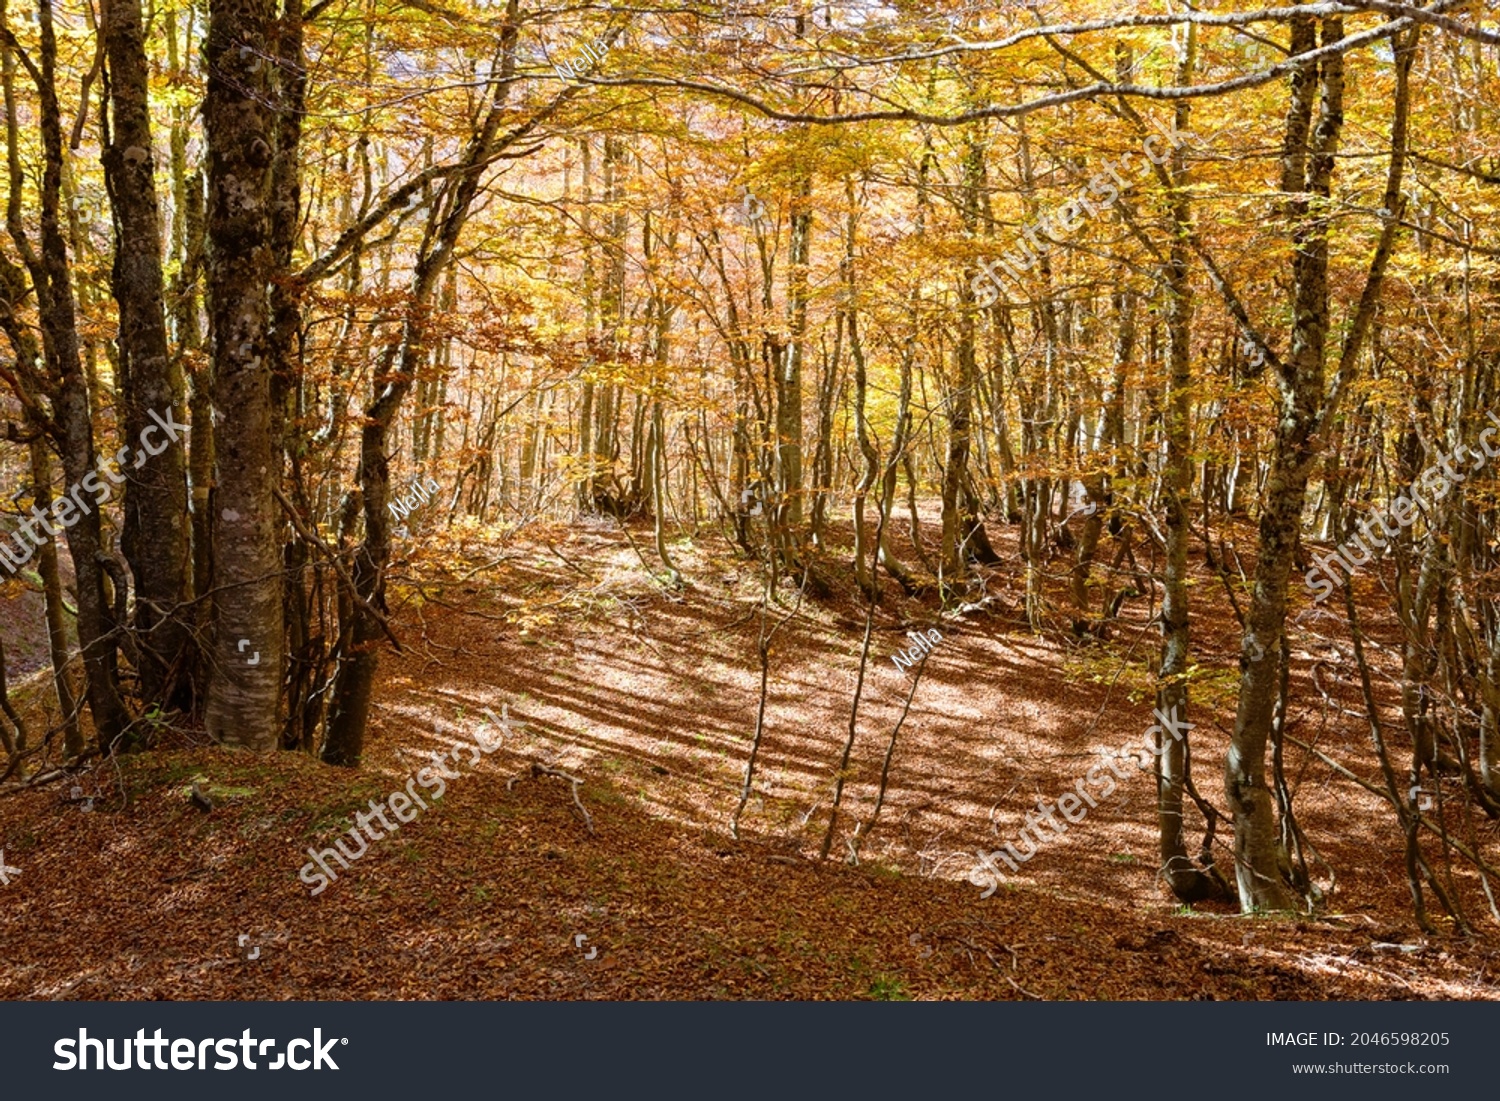 Beech forest in autumn, Pollino National Park, southern Italy. #2046598205